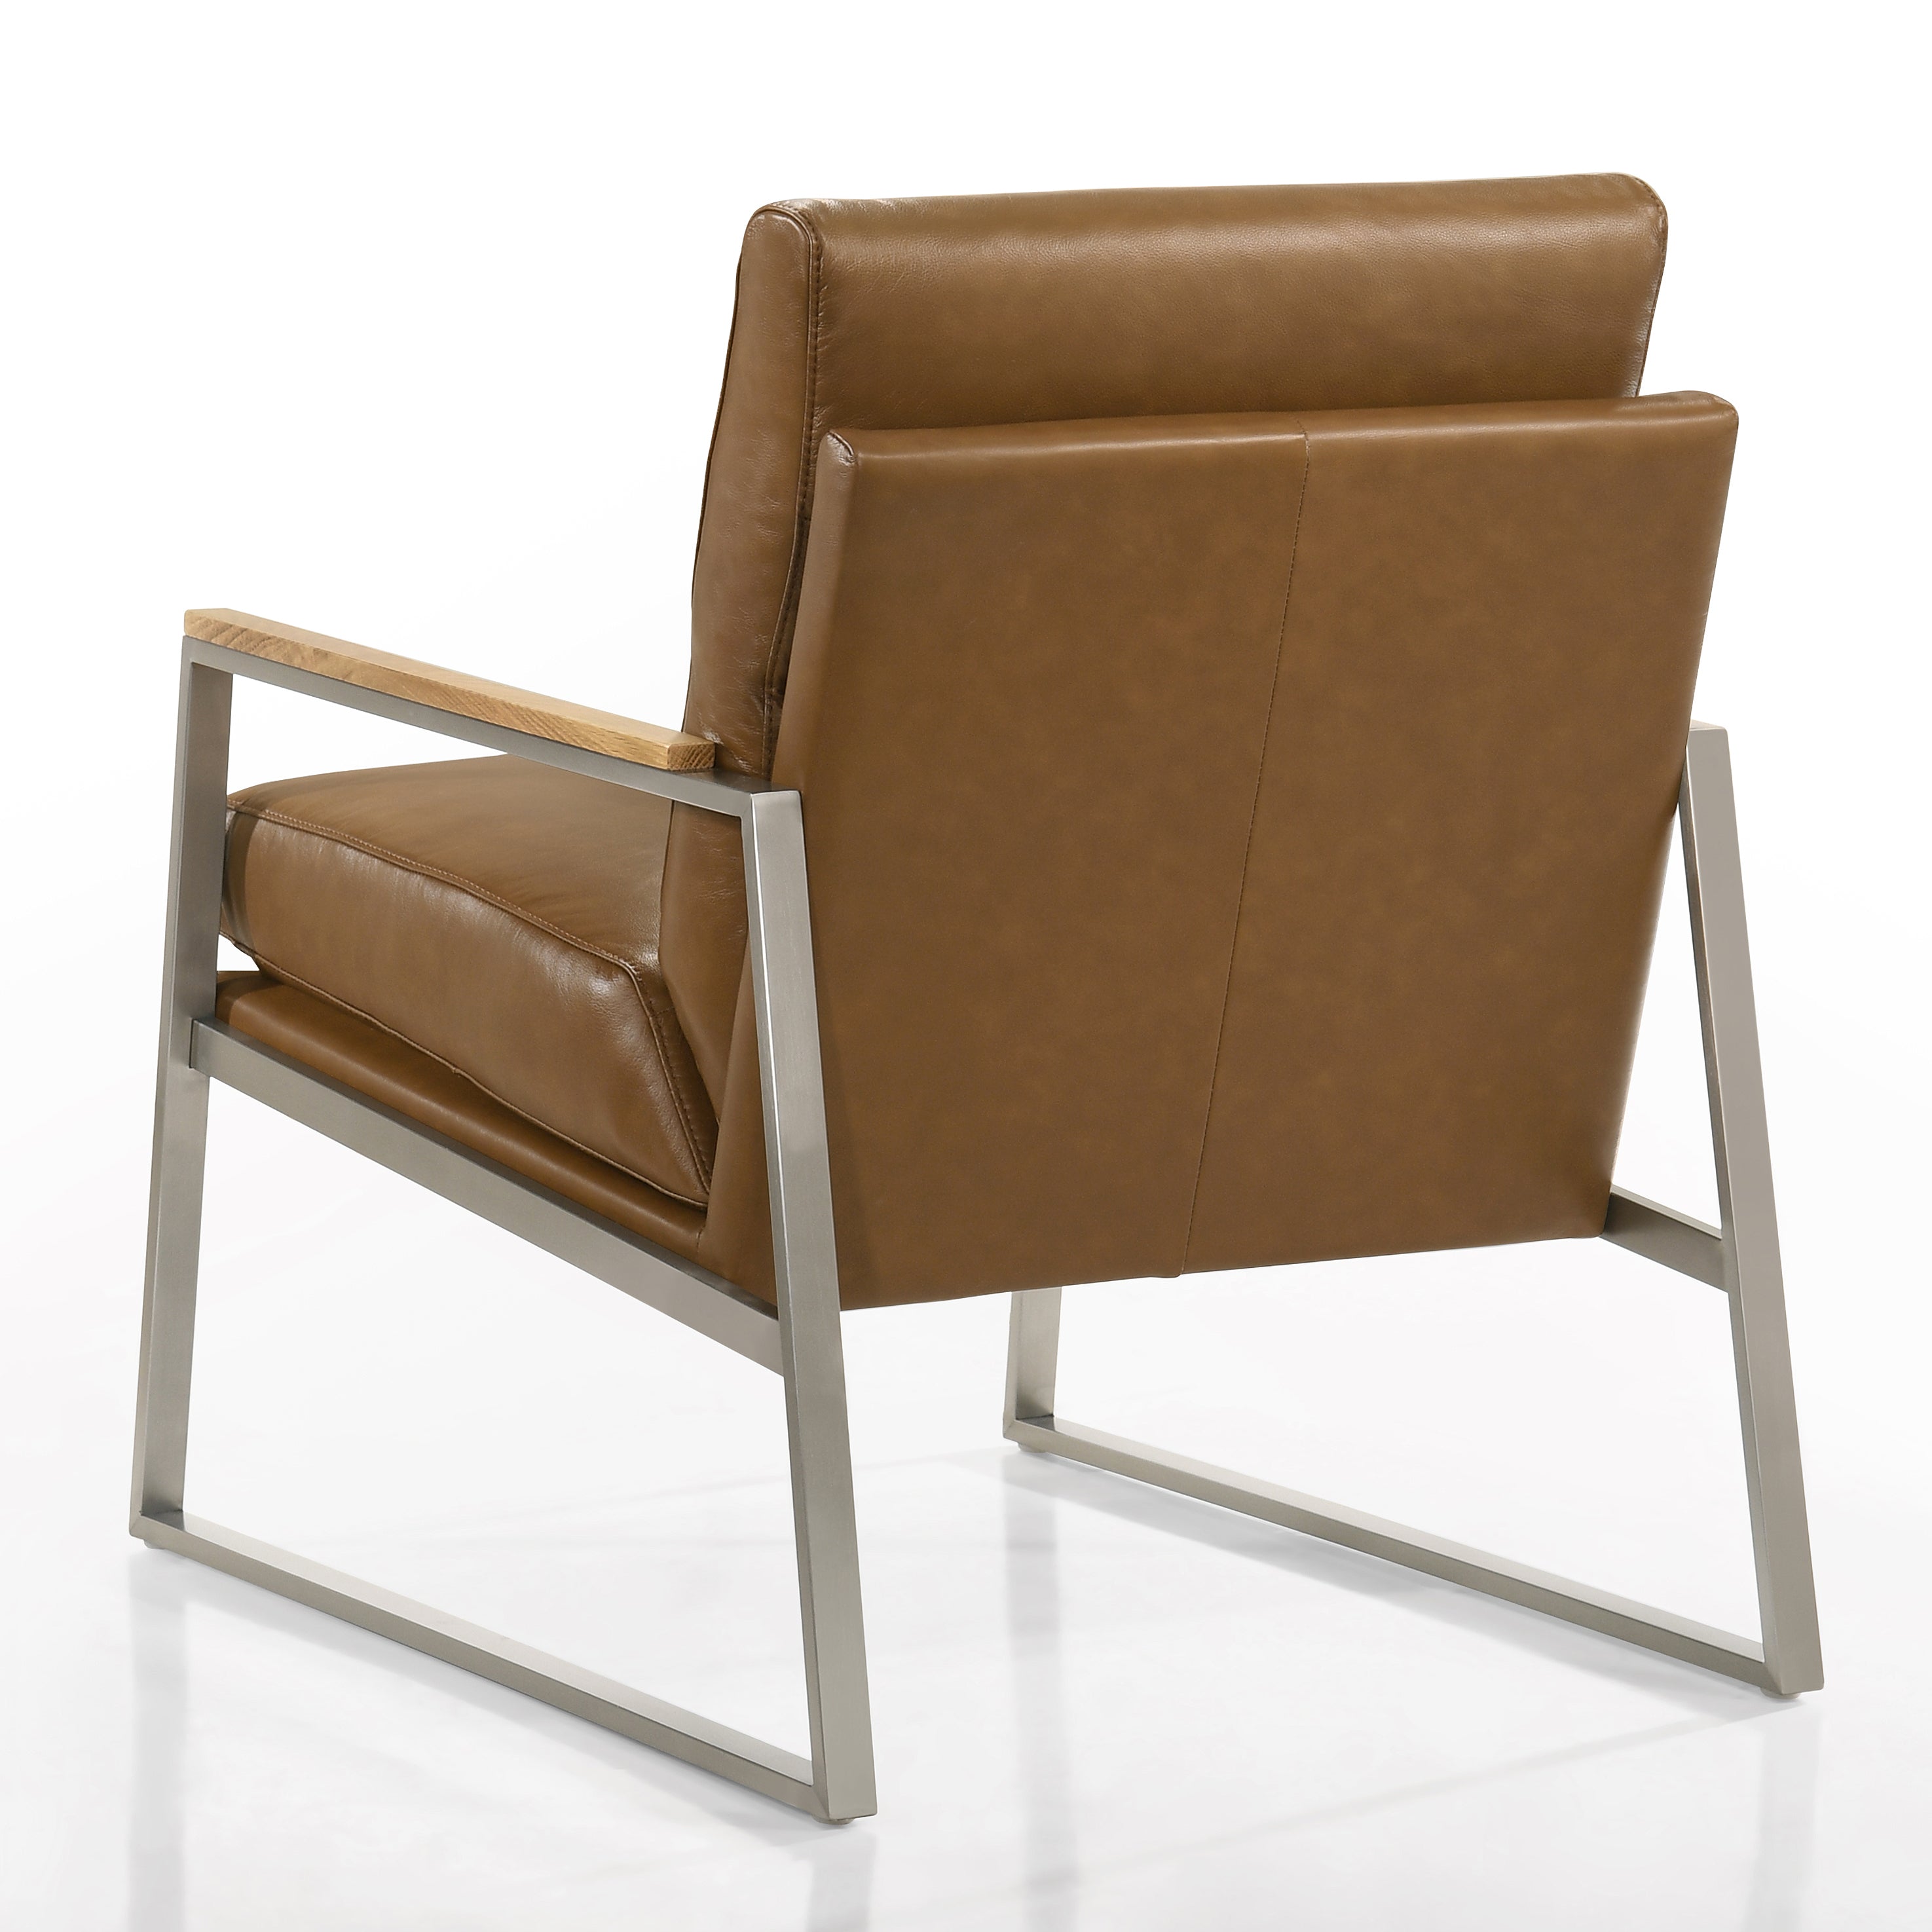 Colin Stainless Steel & Genuine Leather Accent Chair, Caramel Brown